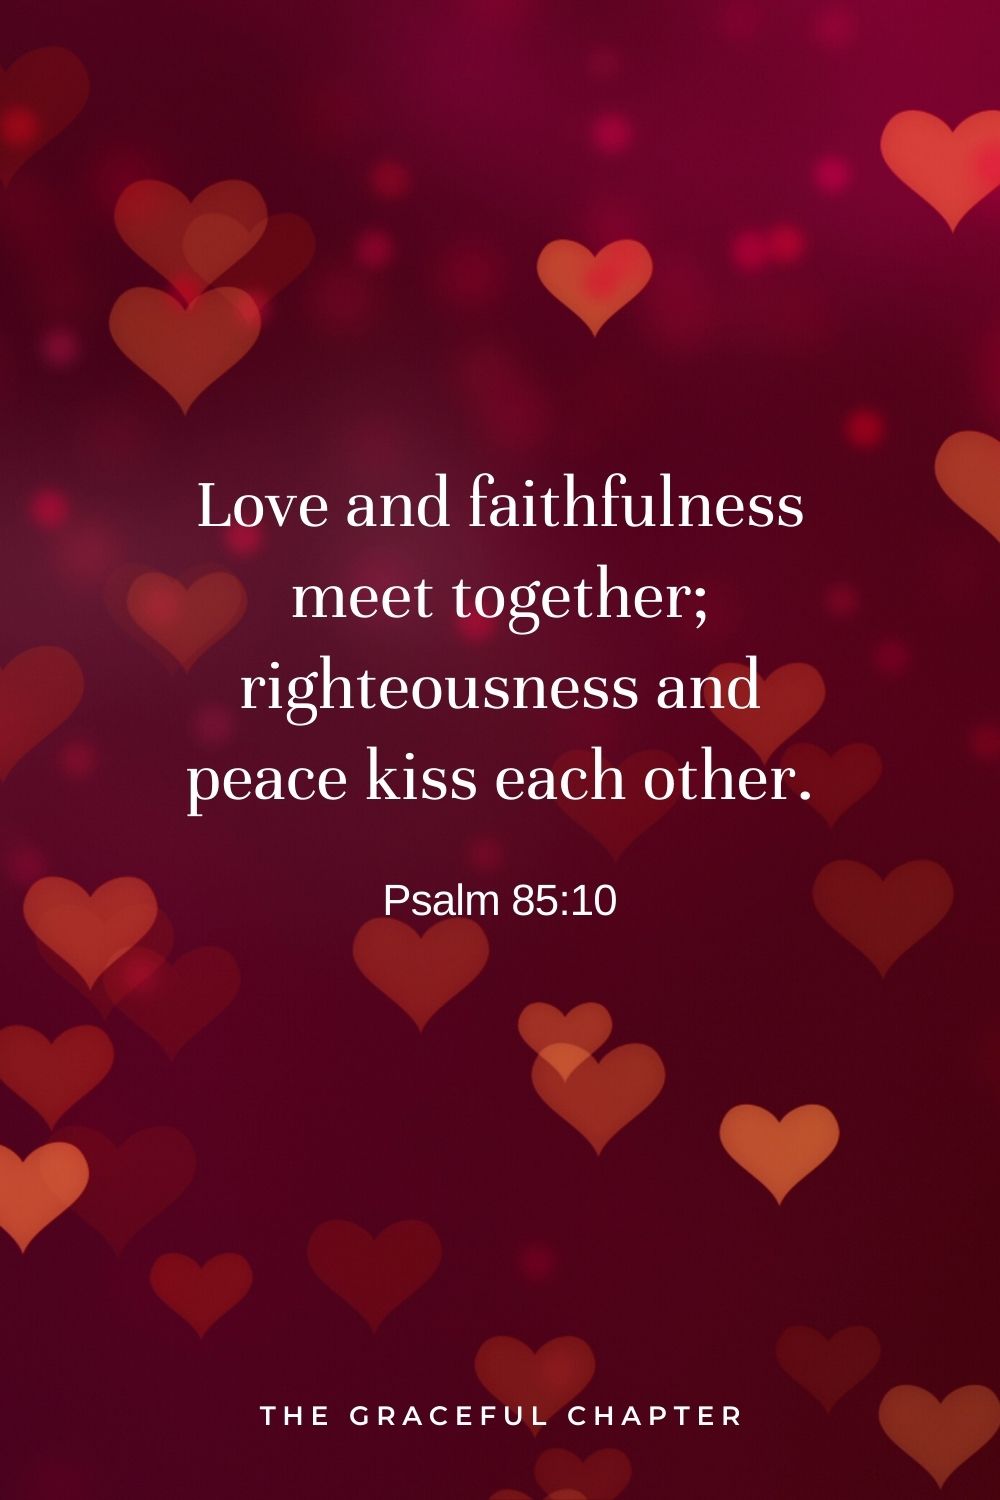 Love and faithfulness meet together; righteousness and peace kiss each other. Psalm 85:10